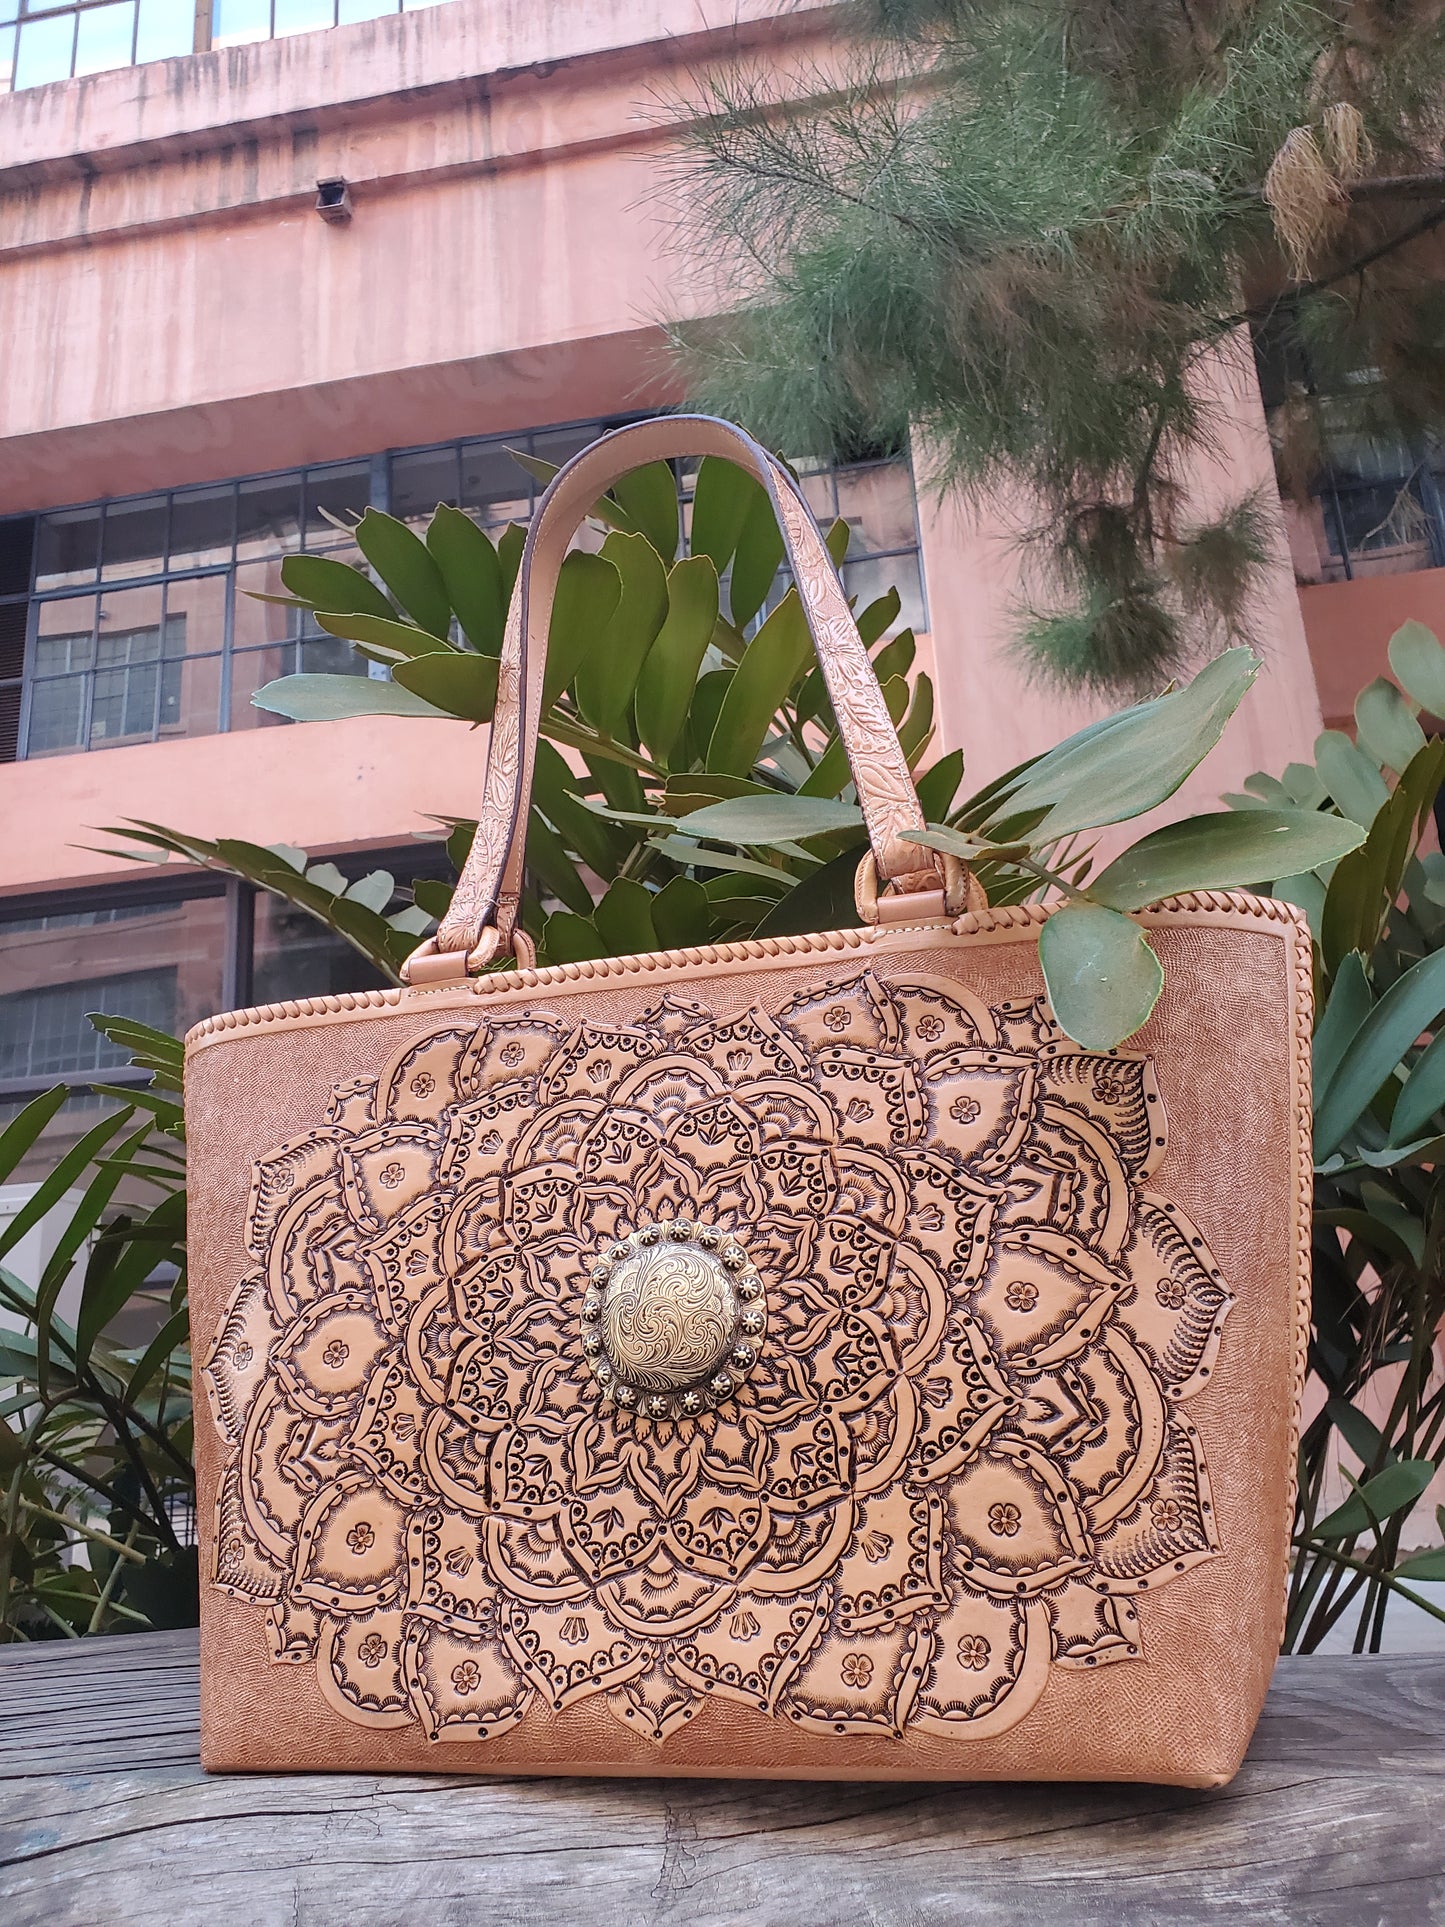 Hand Made Leather Tote Bag "MIA" by MIOHERMOSA Natural Mia Sun Middle